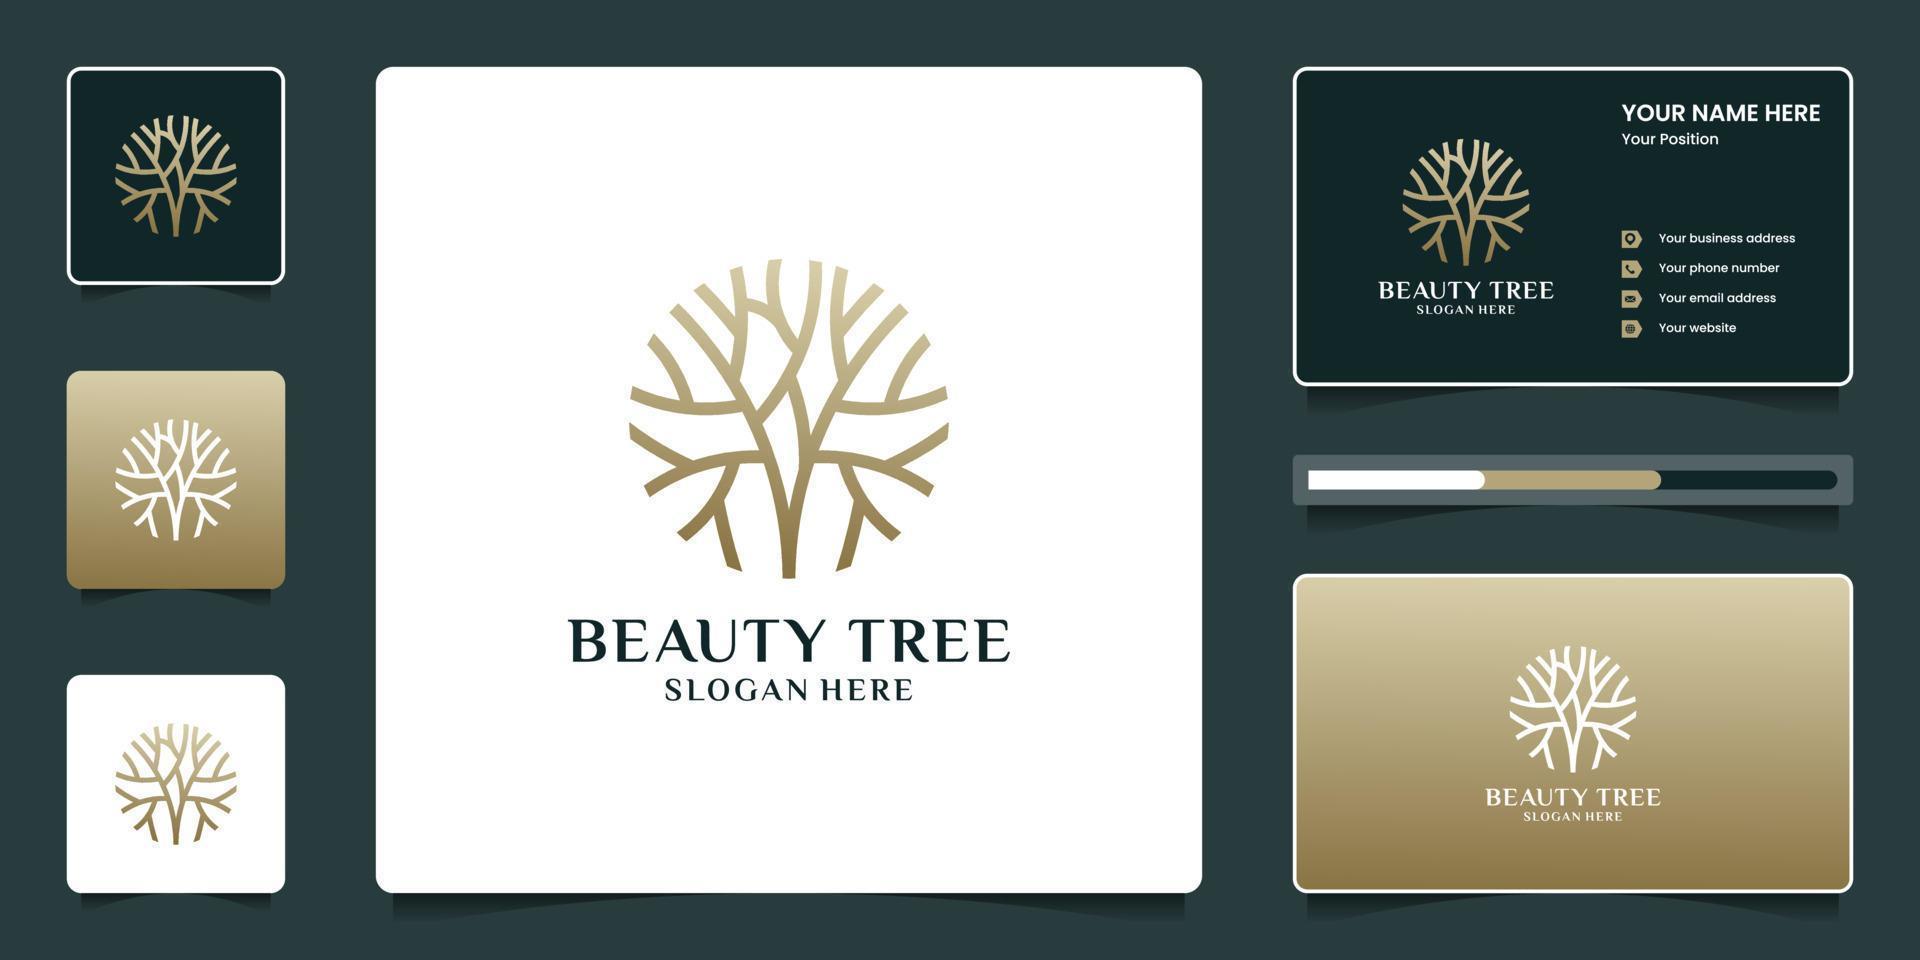 Beauty tree logo design with business card vector